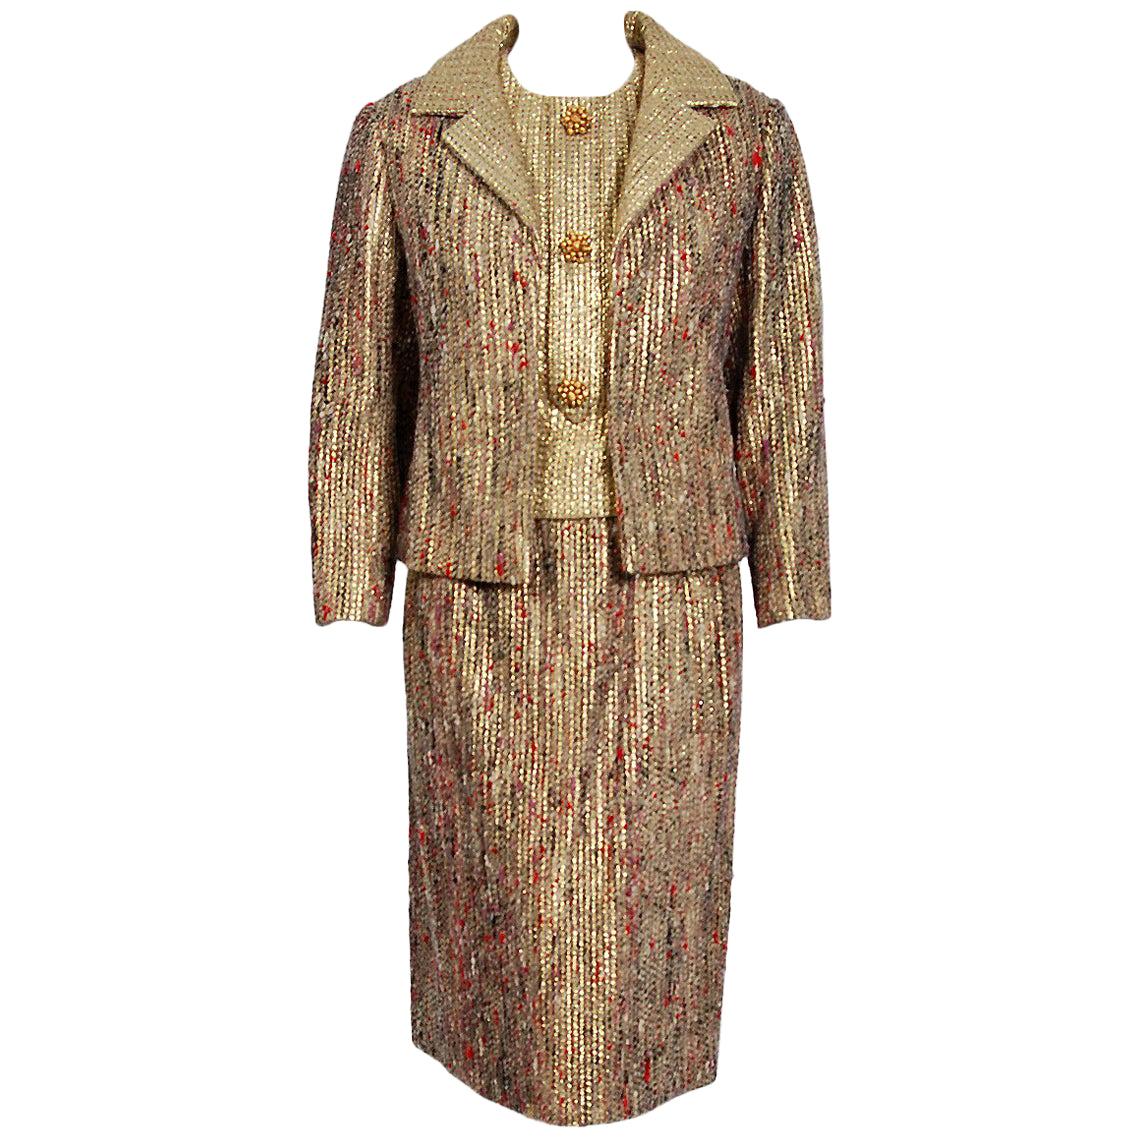 Vintage 1963 Christian Dior Gold Lamé & Textured Wool Documented Dress Suit